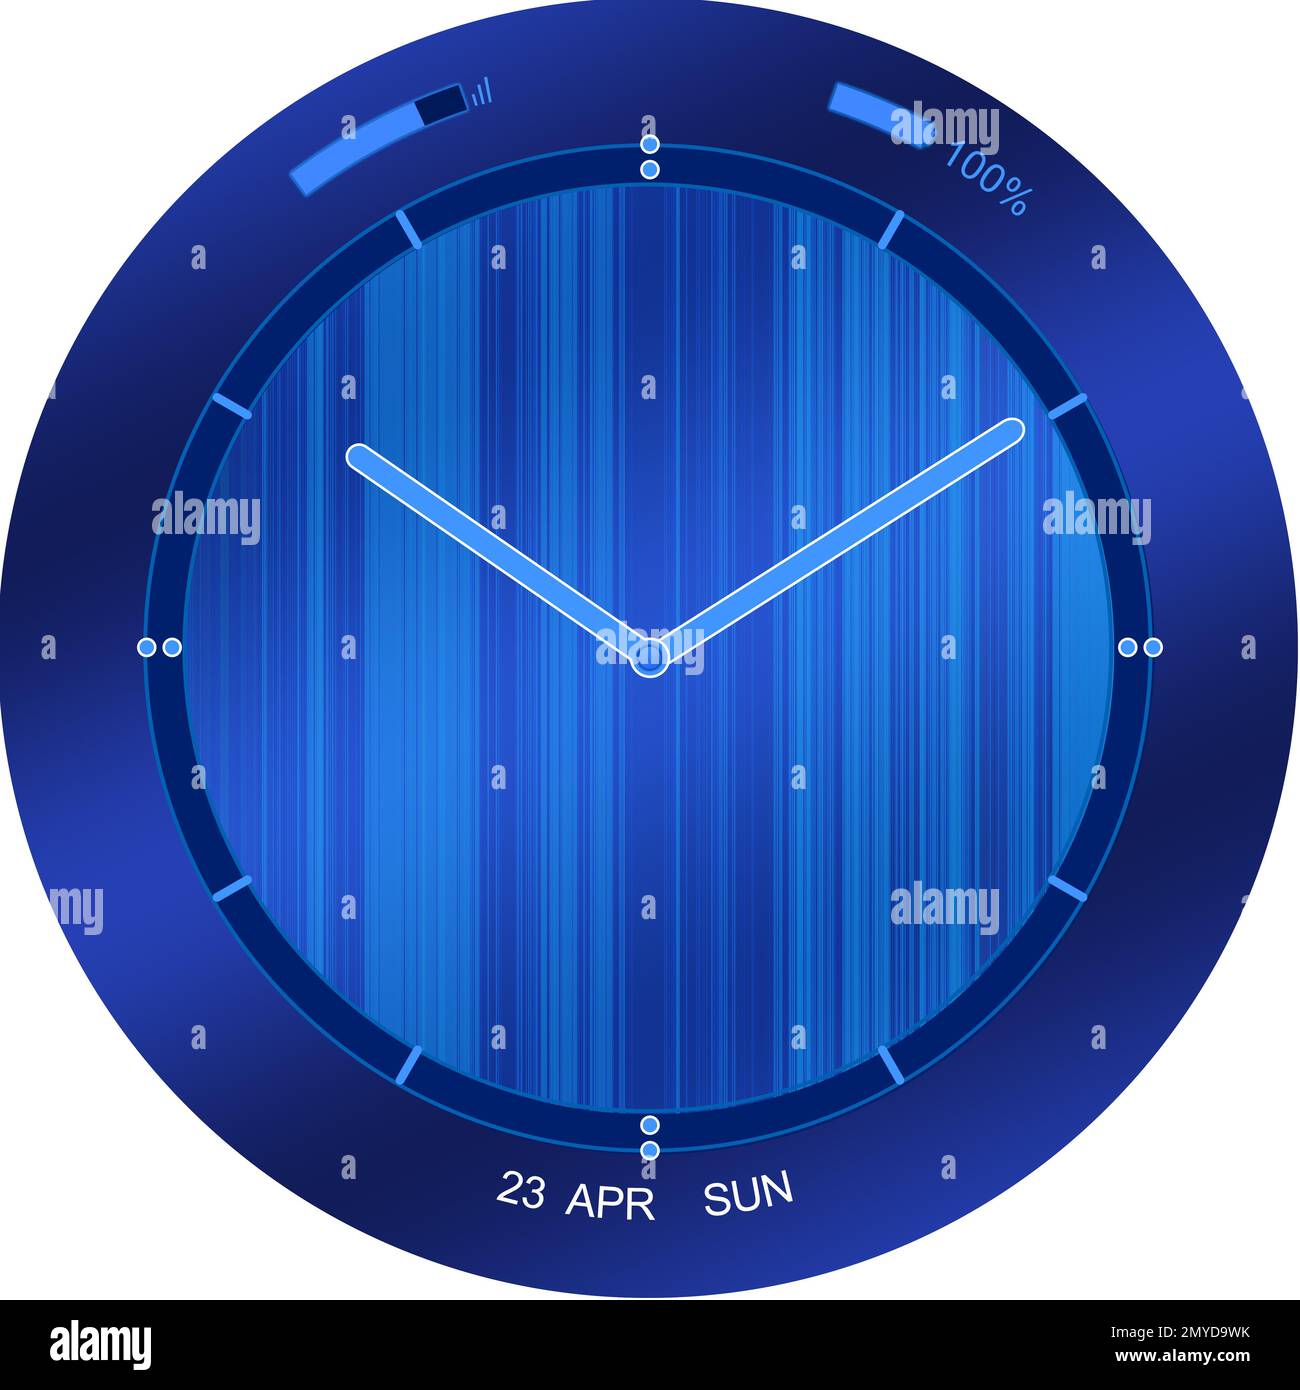 Clock Face Images – Browse 388,854 Stock Photos, Vectors, and